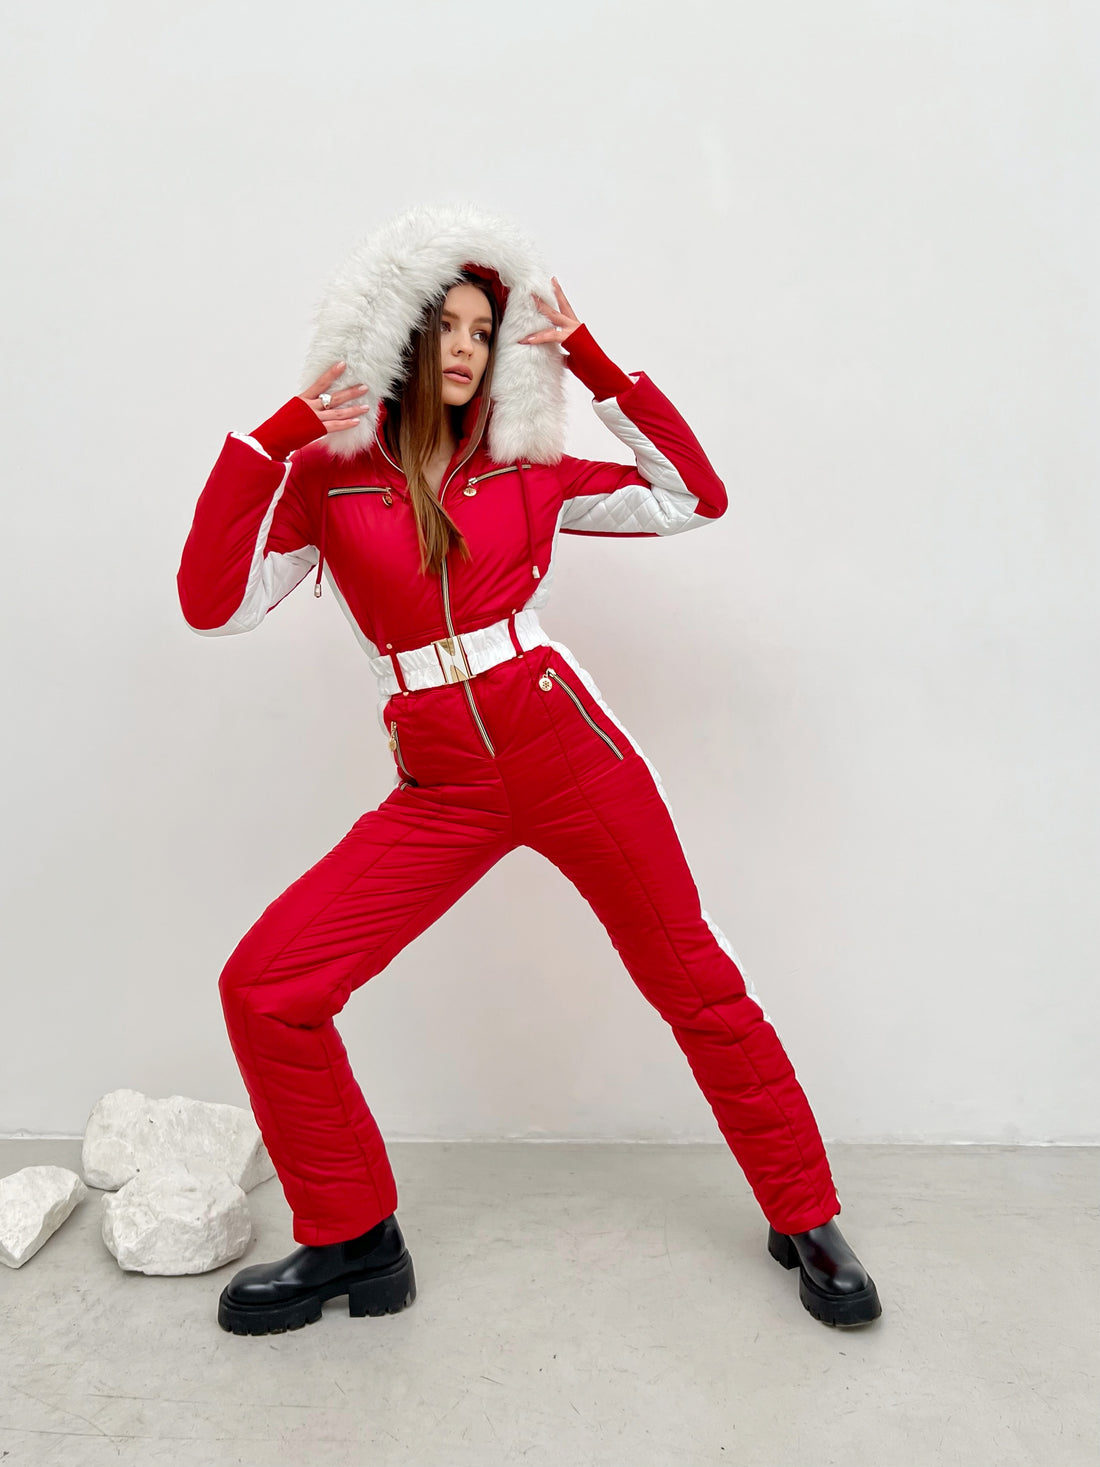 Bright ski one piece DENALI - RED-WHITE inserts on side jumpsuit